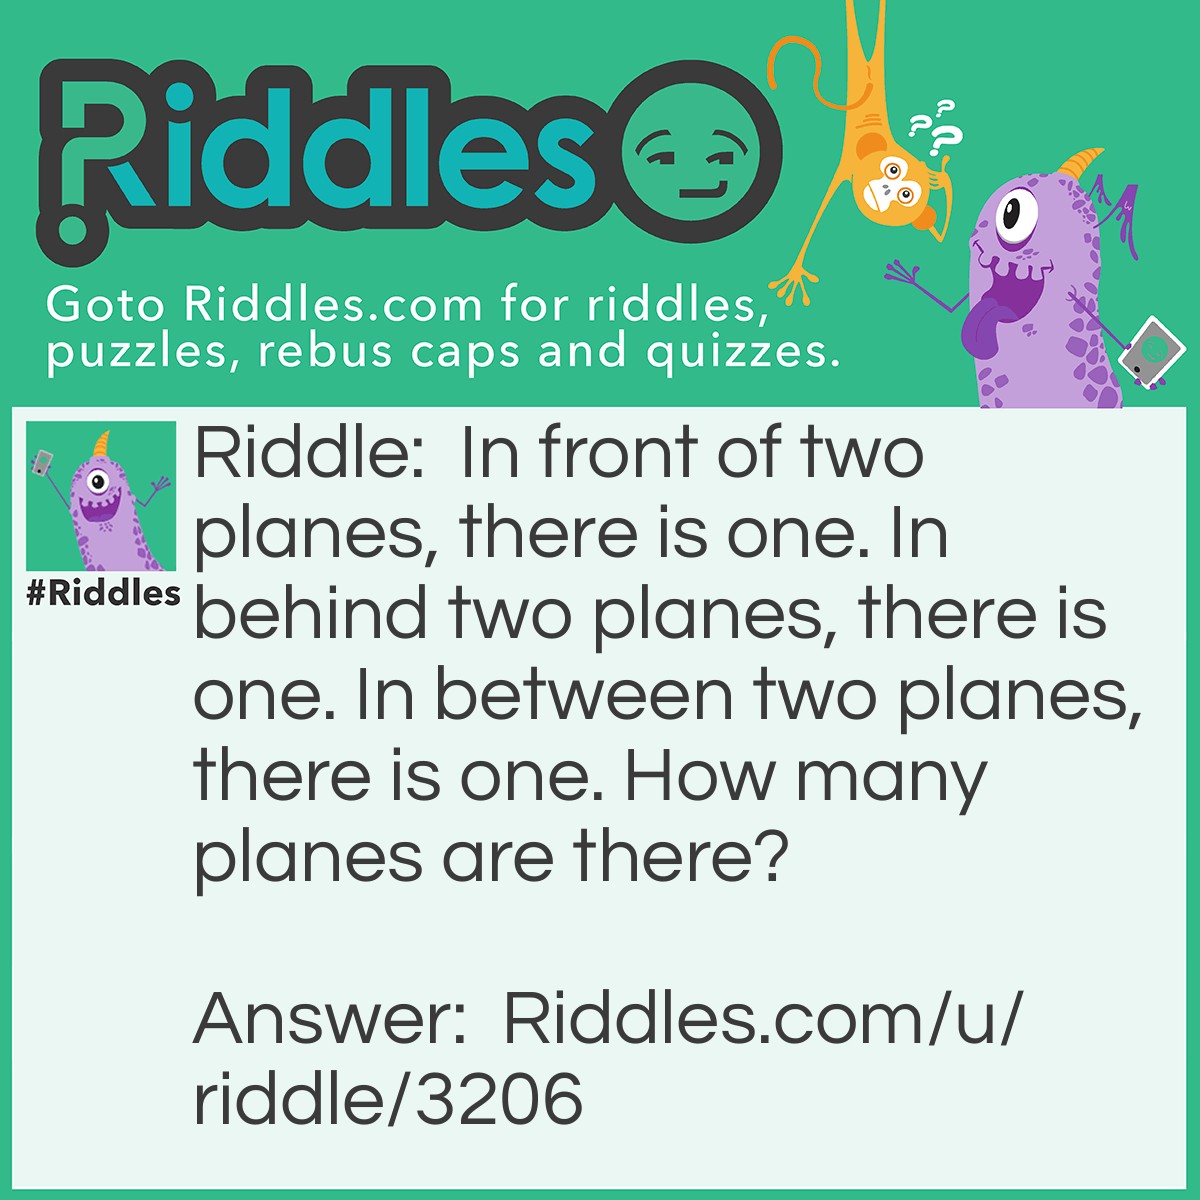 Riddle: In front of two planes, there is one. In behind two planes, there is one. In between two planes, there is one. How many planes are there? Answer: 3 planes. If there are three planes in a row, in front of two, there is one, in behind two, there is one, and in between two, there is one.